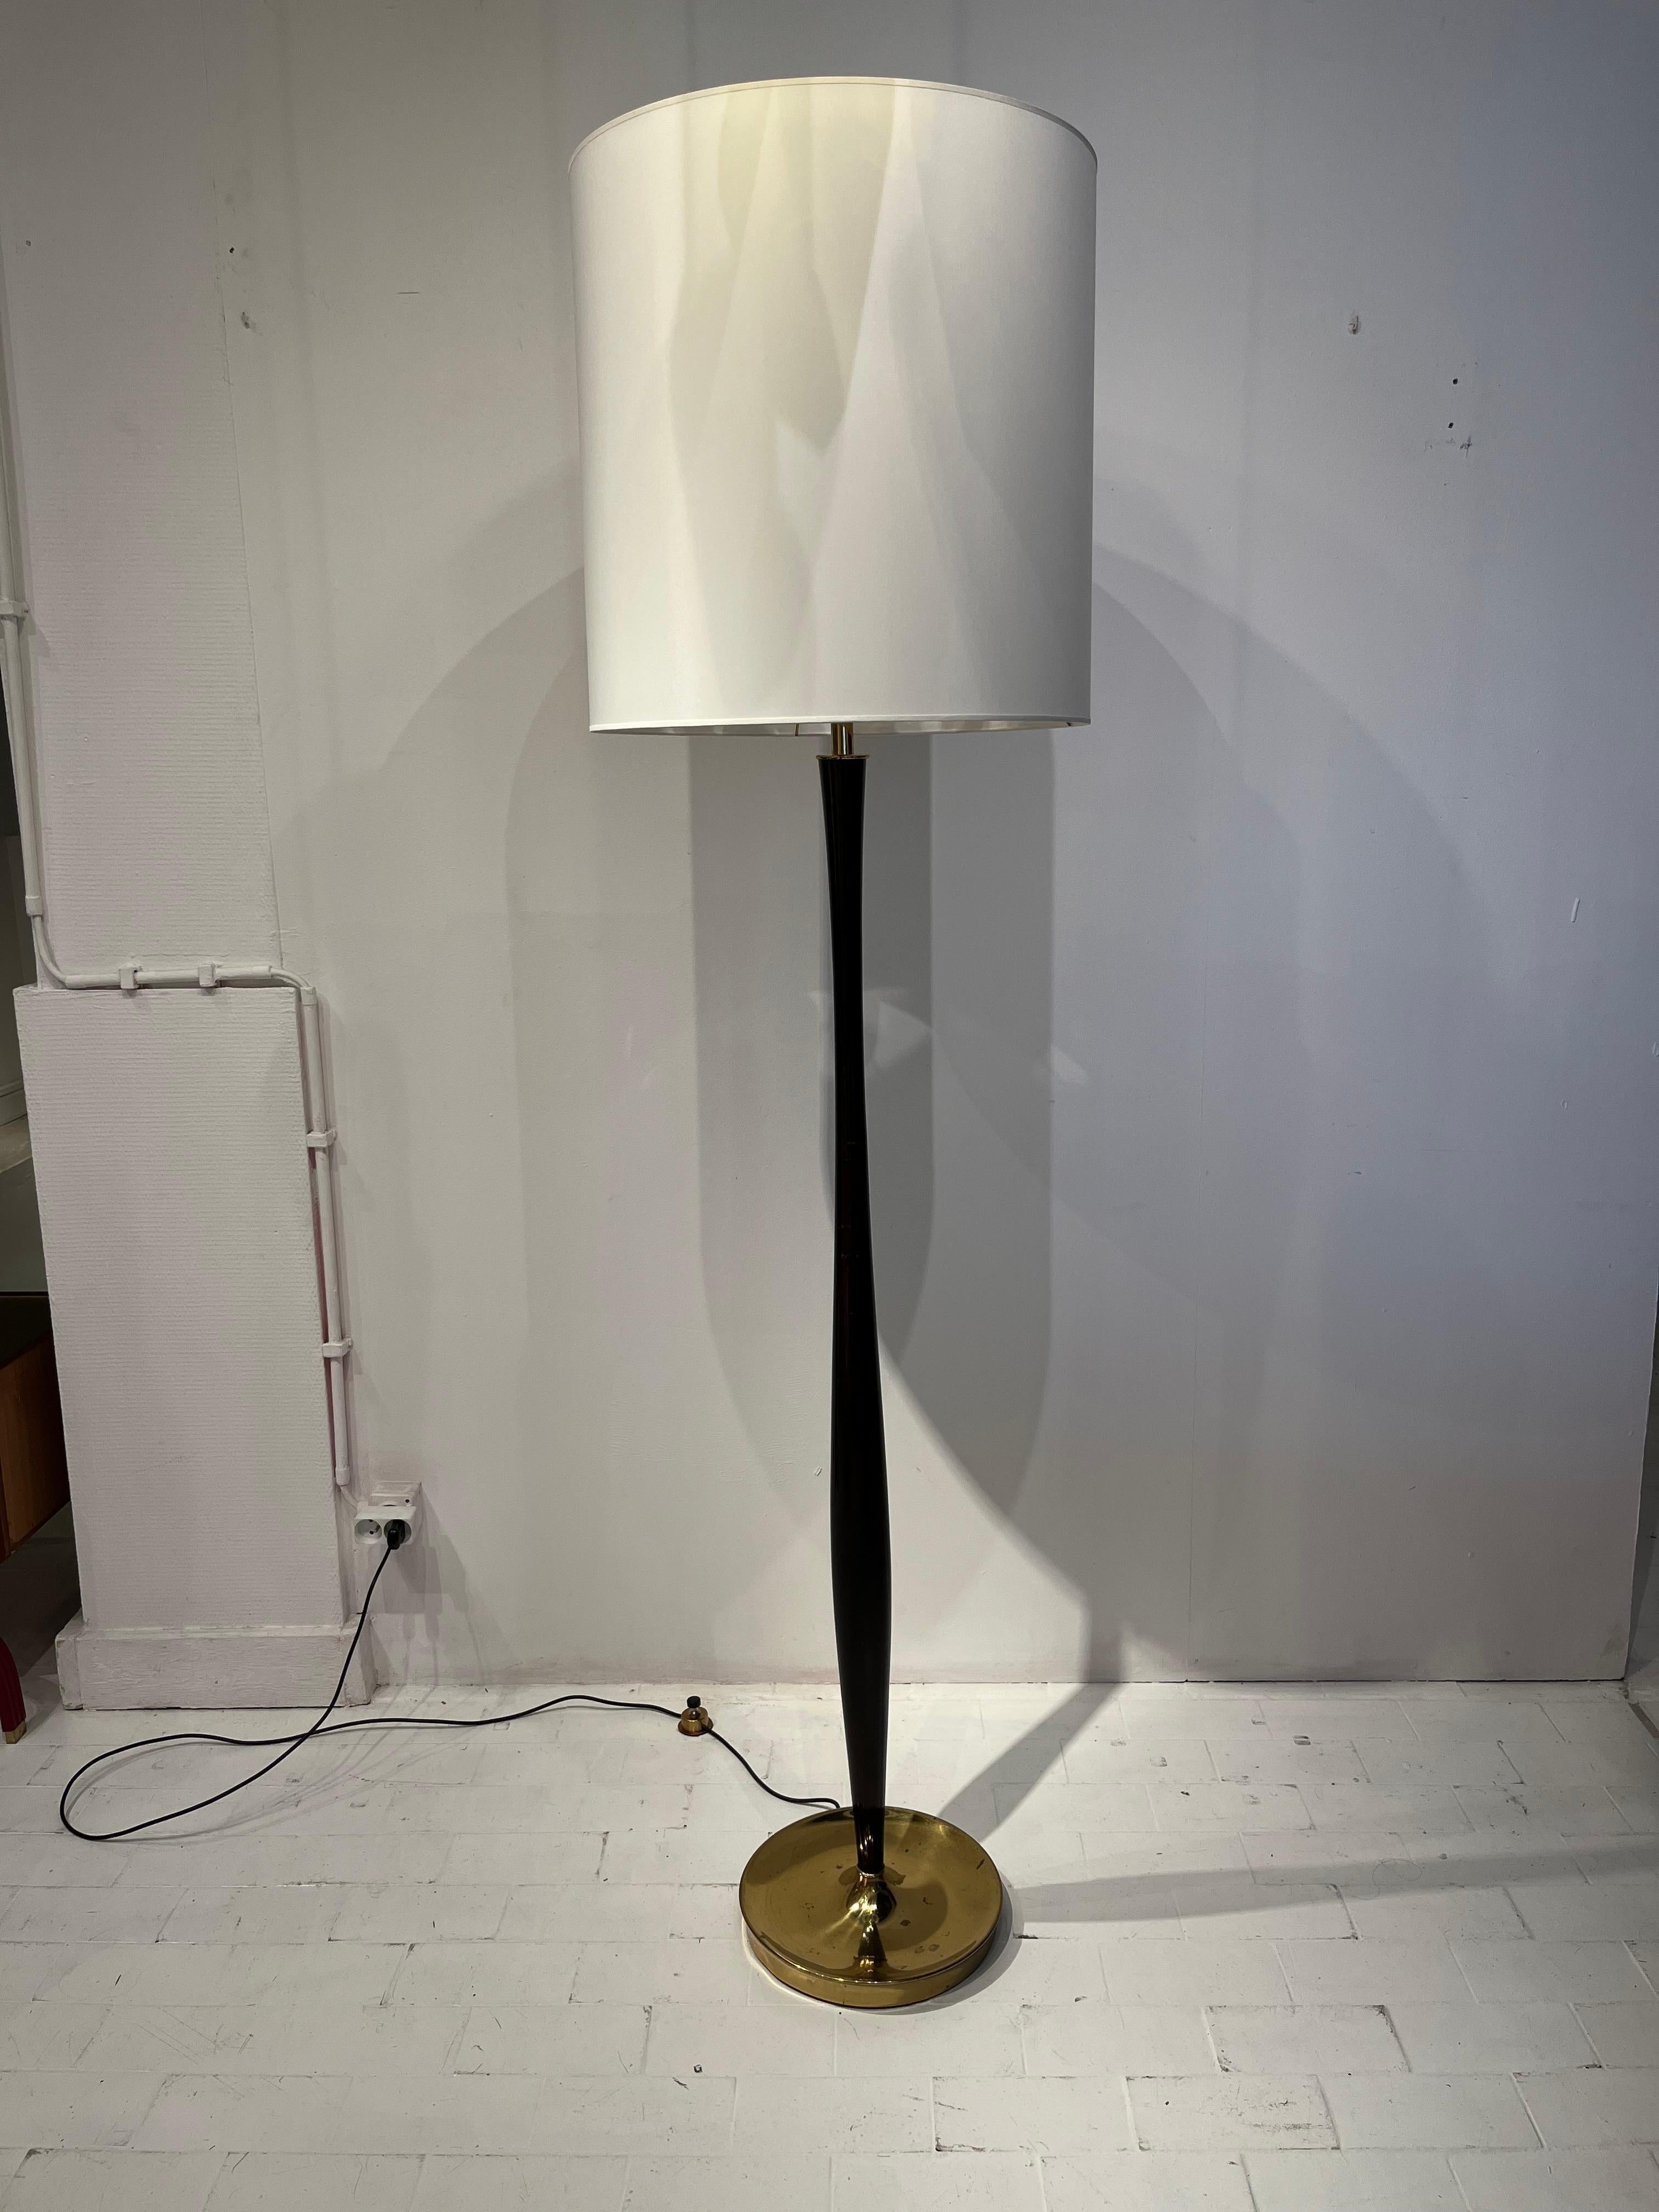 Elegant lacquered walnut and brass Stilnovo floor lamp. The lamp dates from the 1950s. The design of this floor lamp is particularly interesting. The cylindrical stem is softly widening towards the base. This simple abstraction gives a sculptural